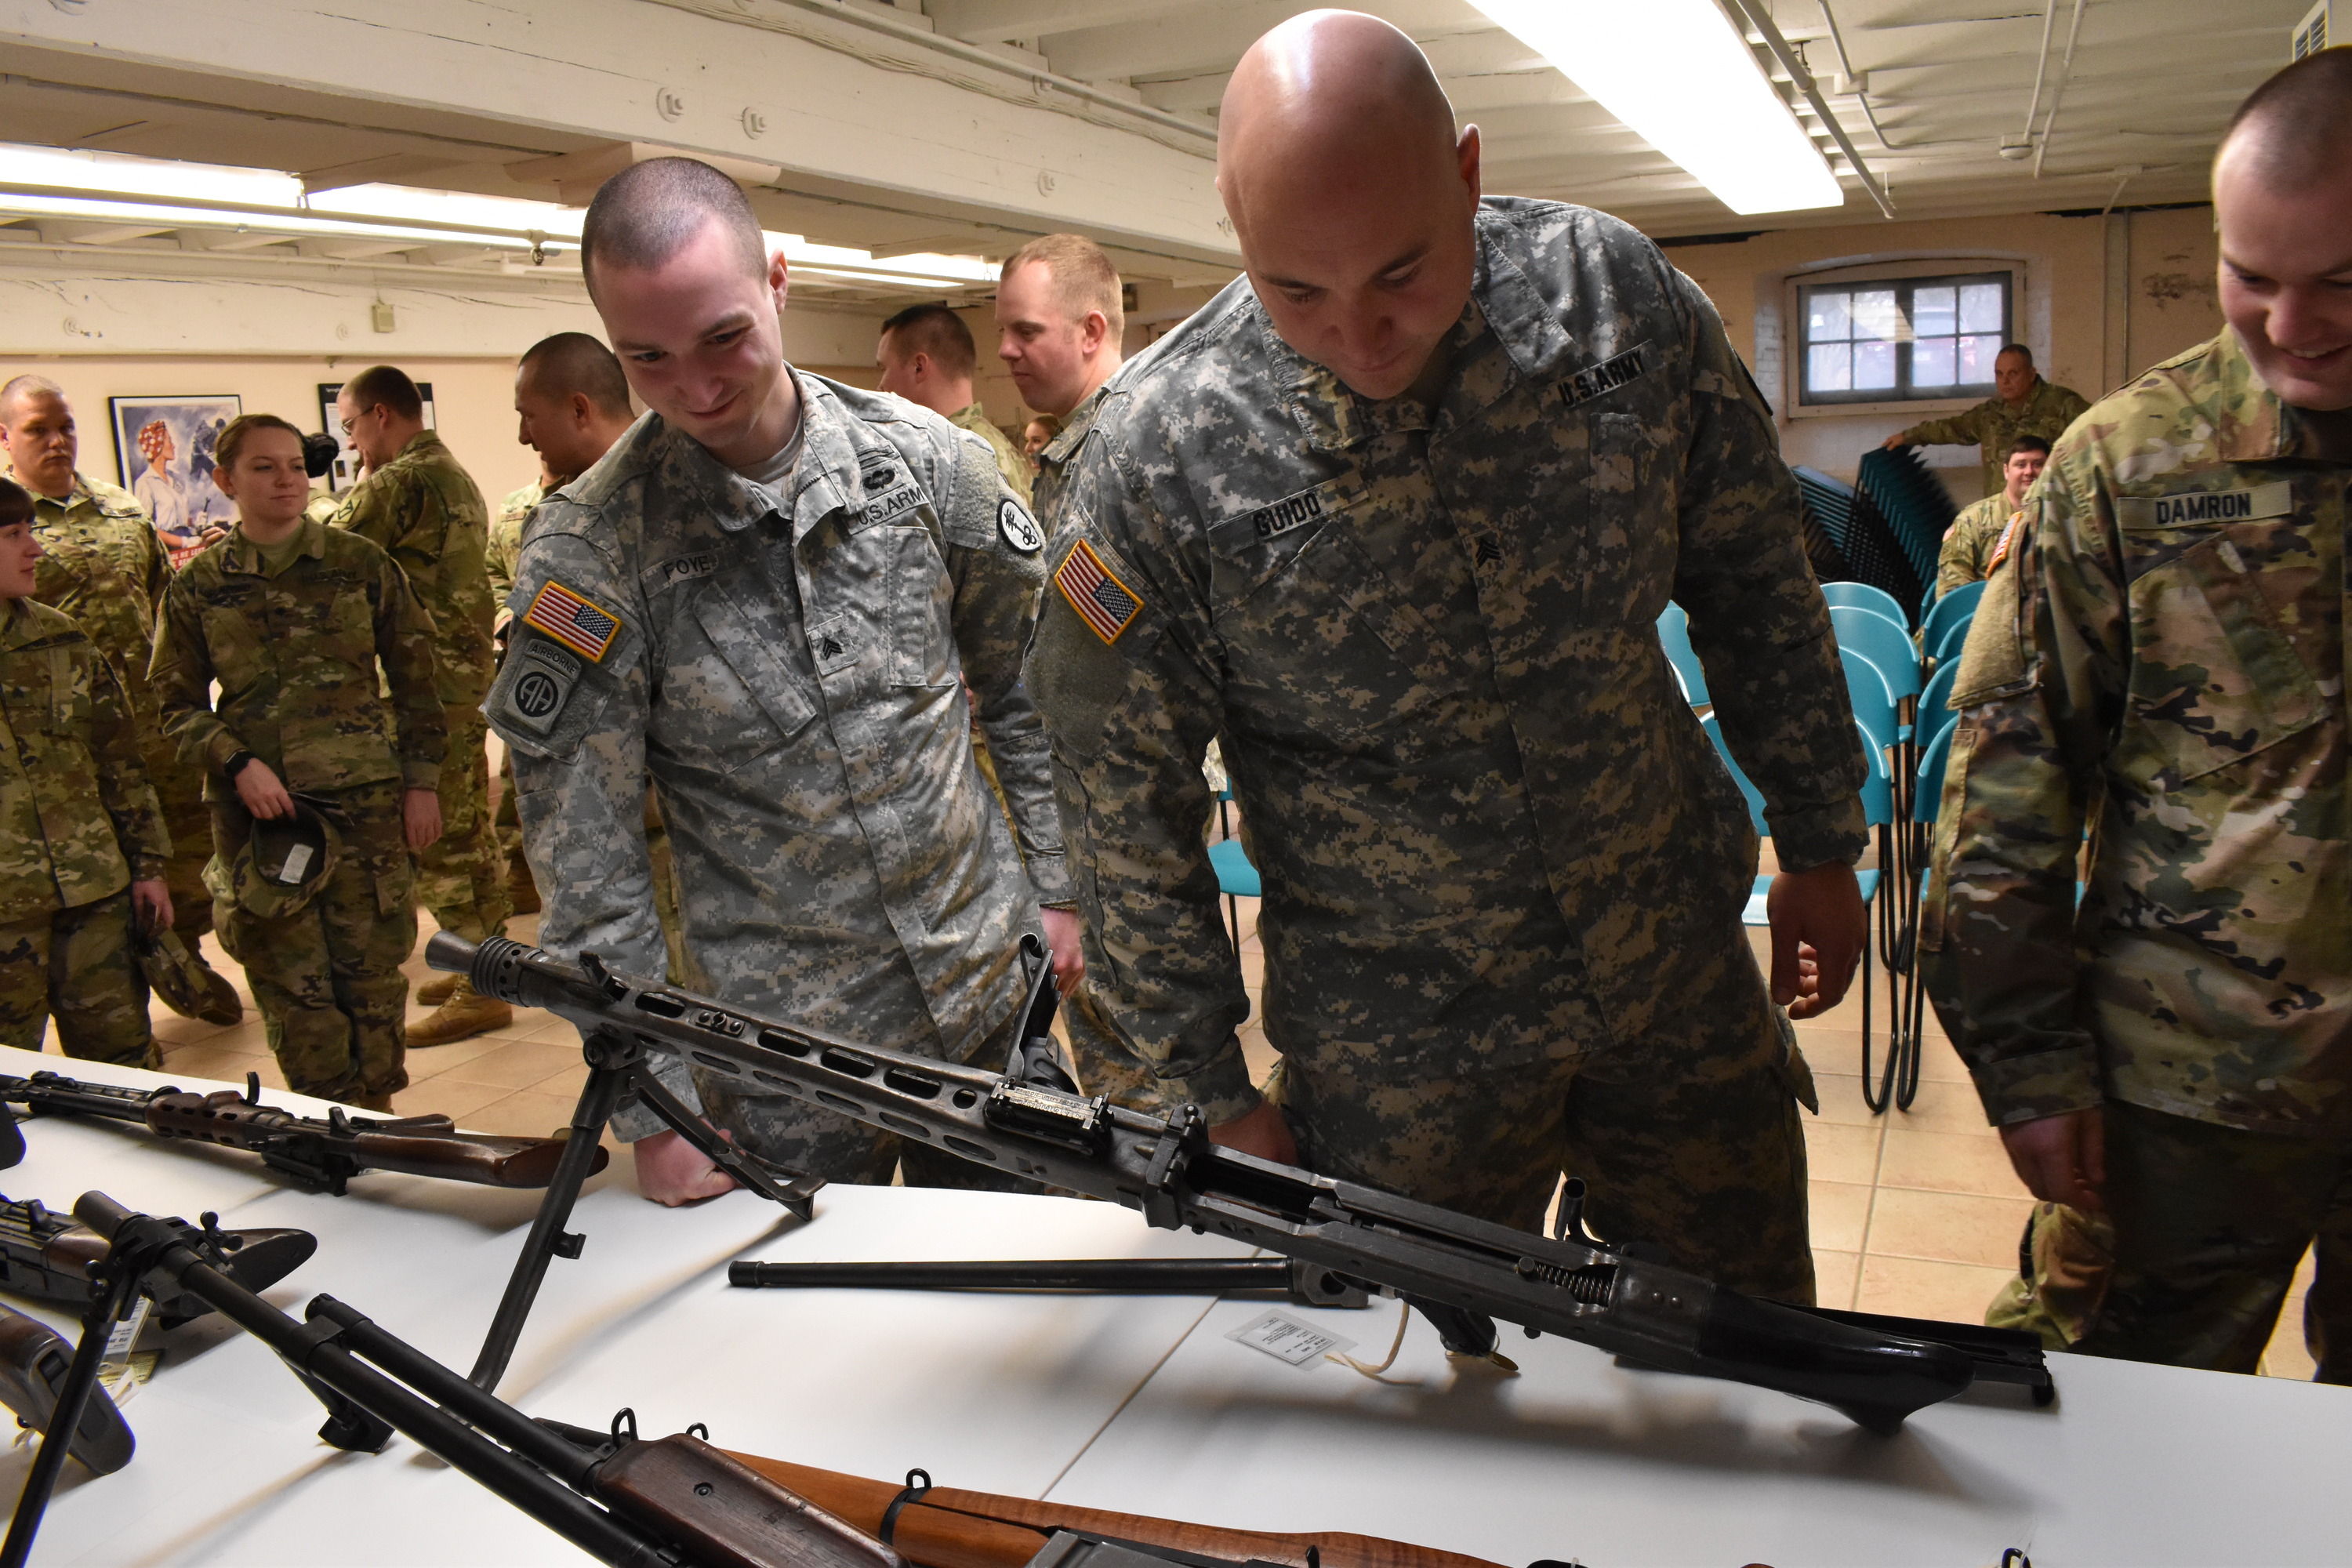 Uniformed soldiers view historic rifles